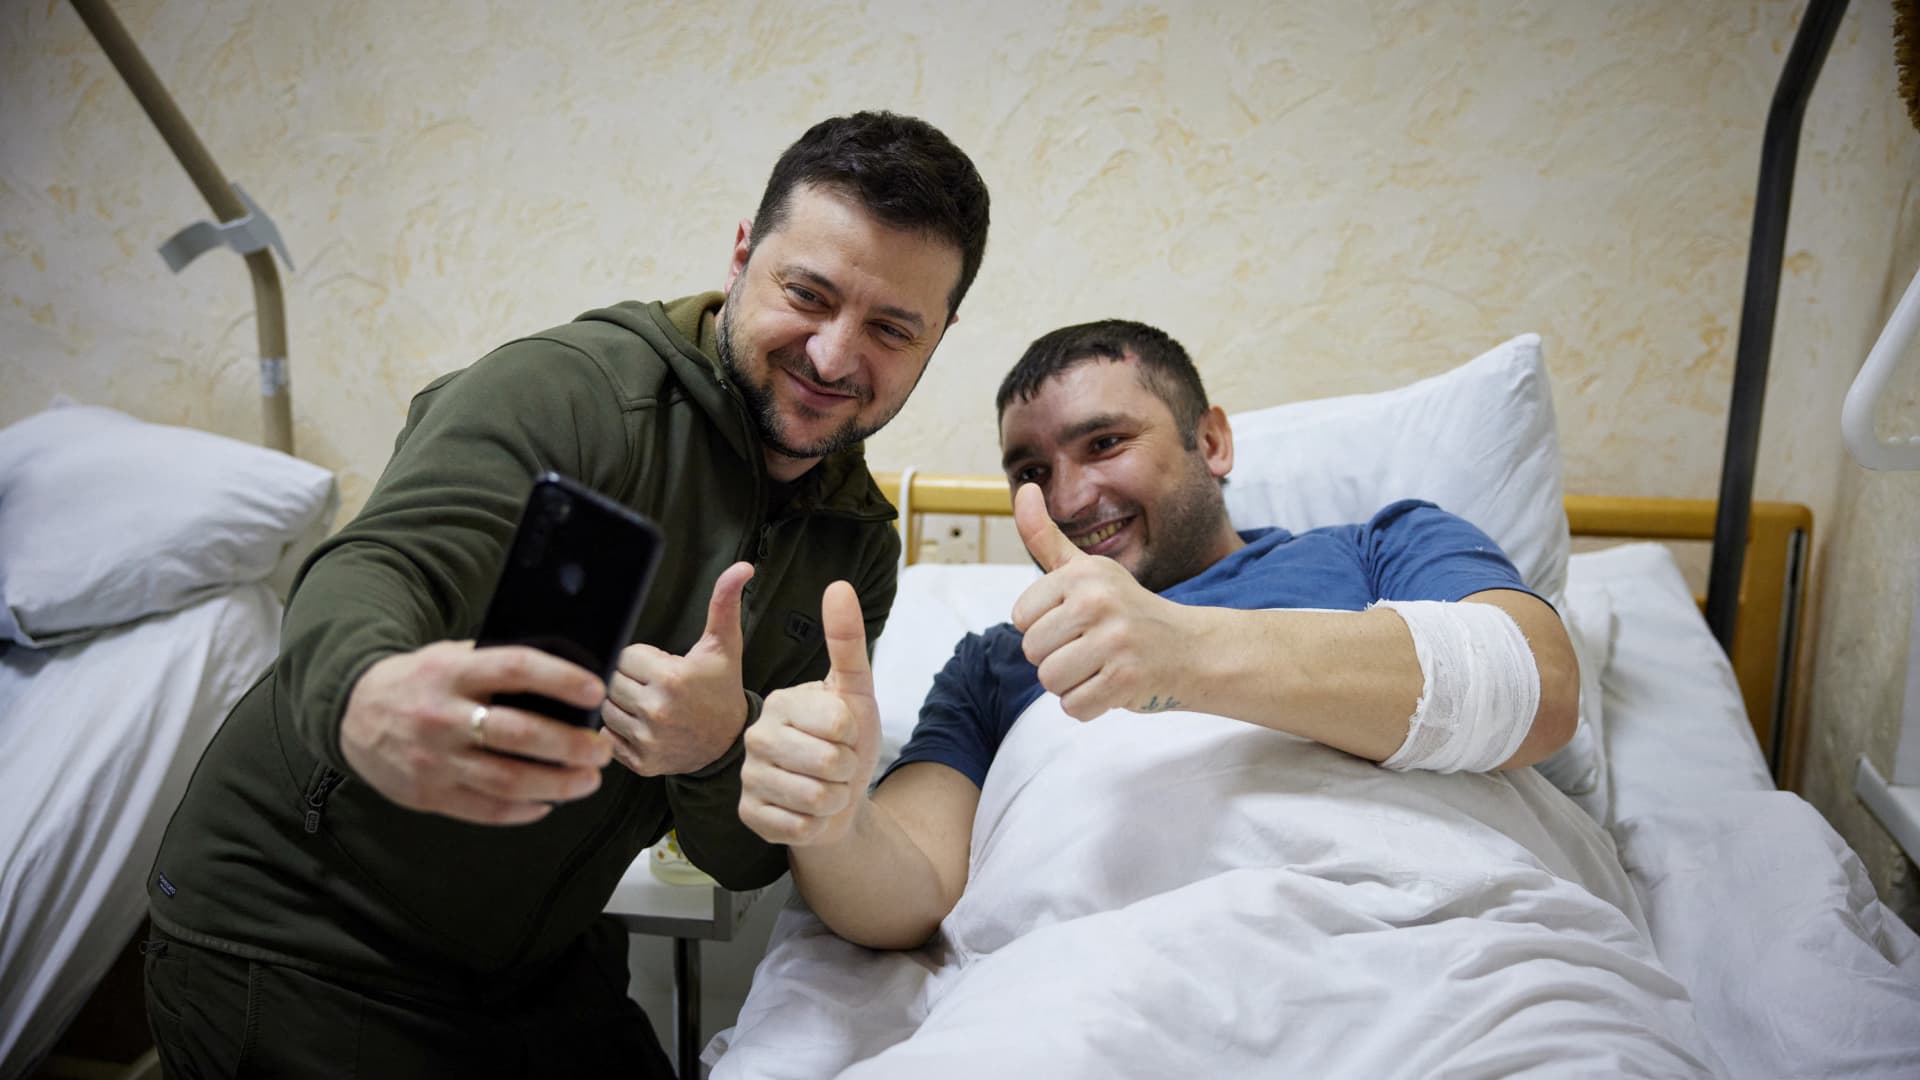 Ukraine?s President Volodymyr Zelenskiy visits an injured Ukrainian serviceman at a military hospital, as Russia's attack on Ukraine continues, in Kyiv, Ukraine March 13, 2022.